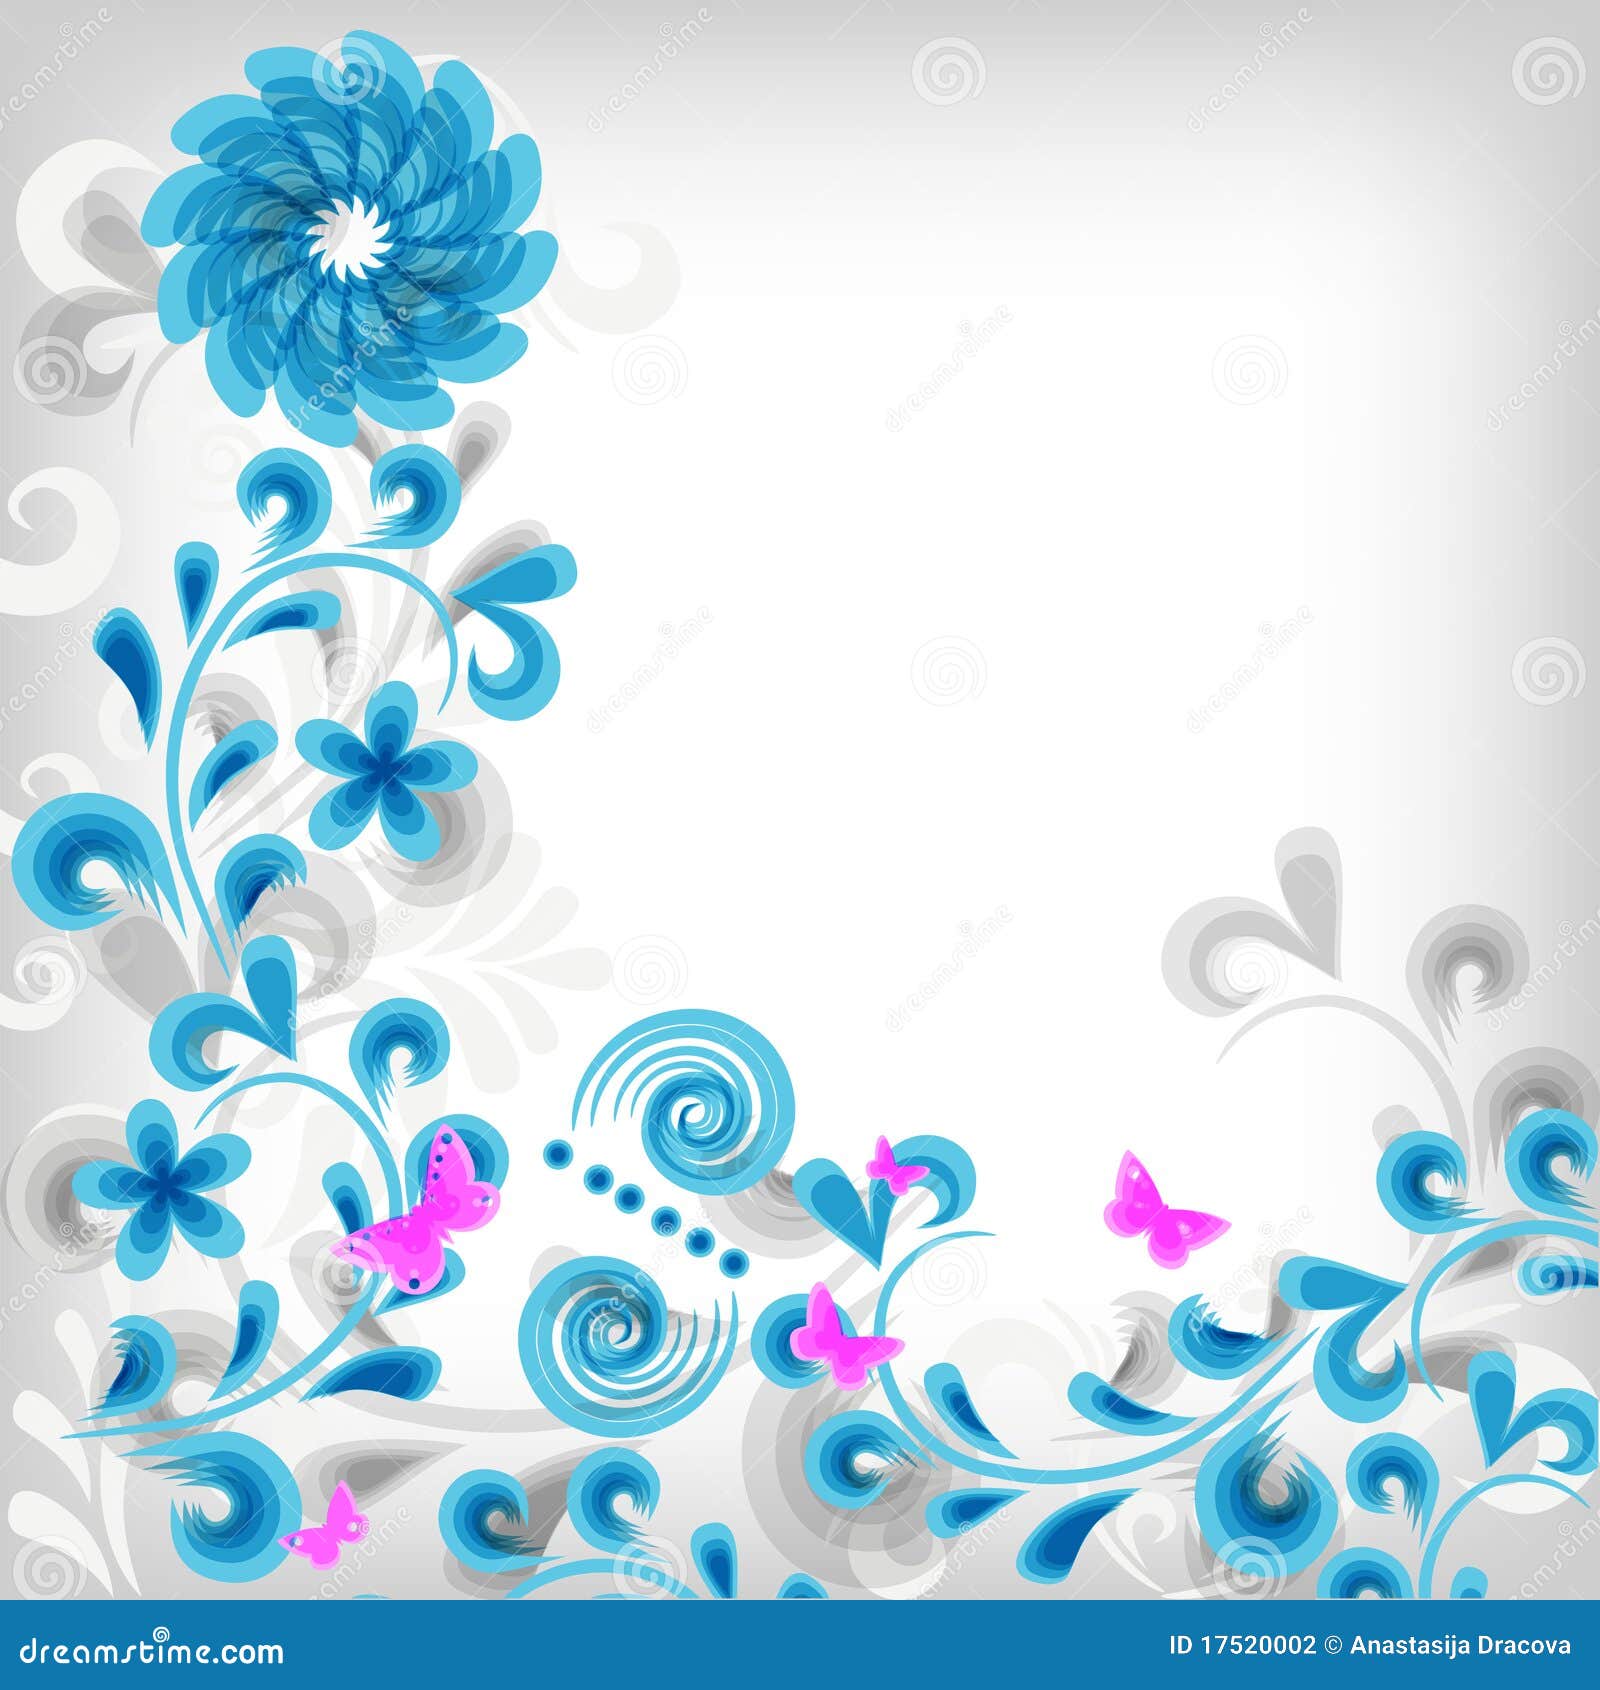 Soft Classic Floral Background Stock Vector - Illustration of